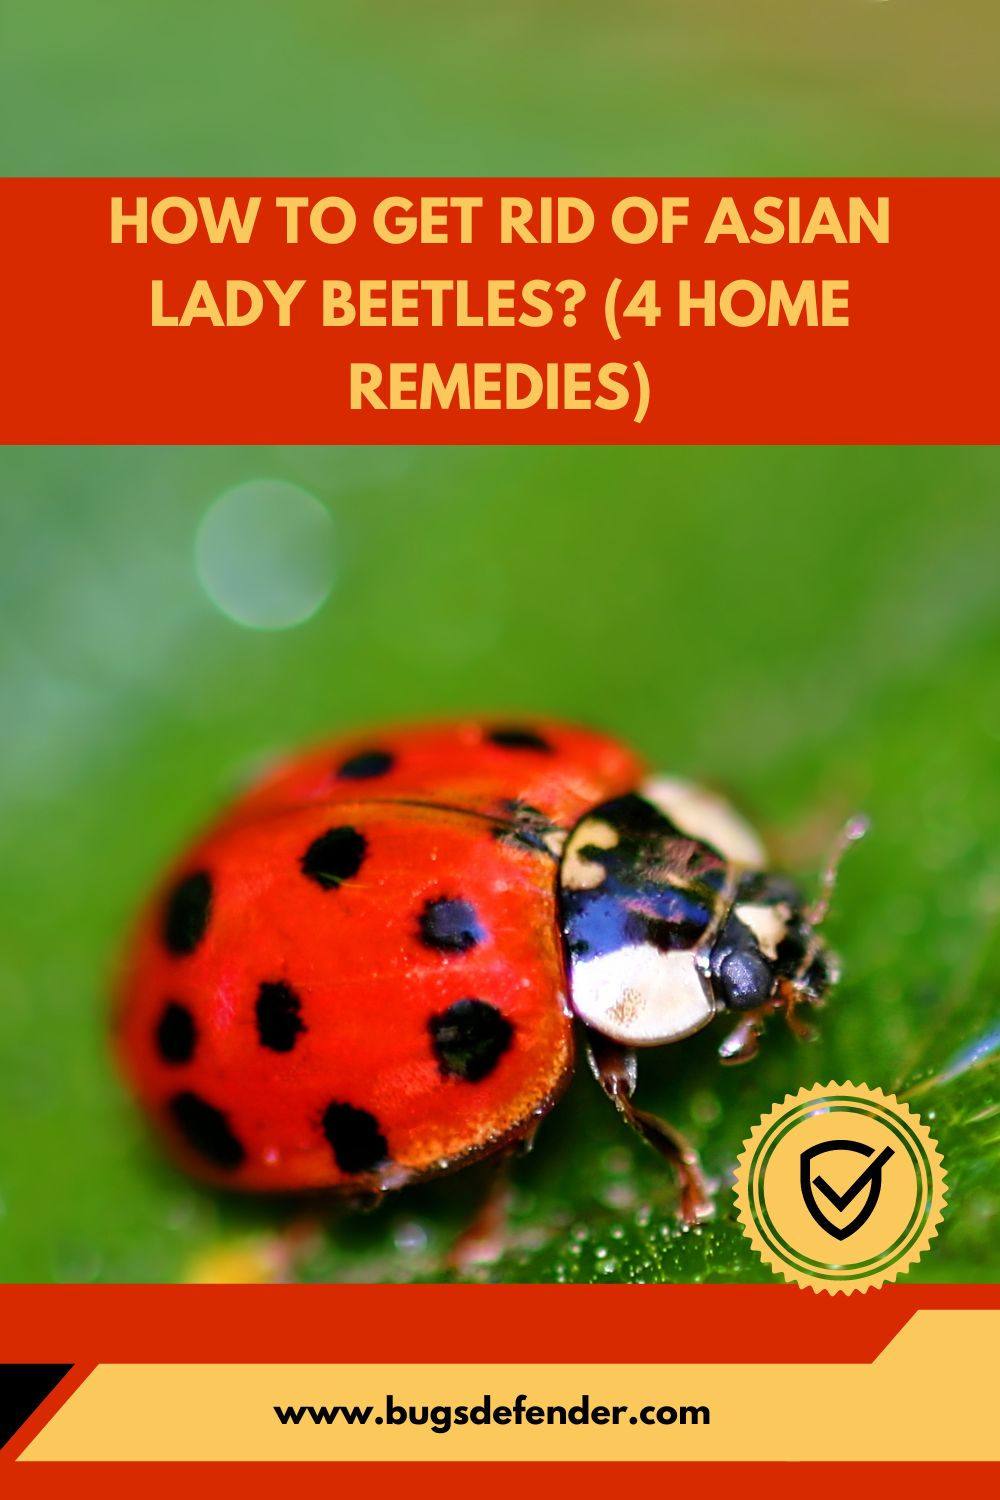 How To Get Rid Of Asian Lady Beetles pin1